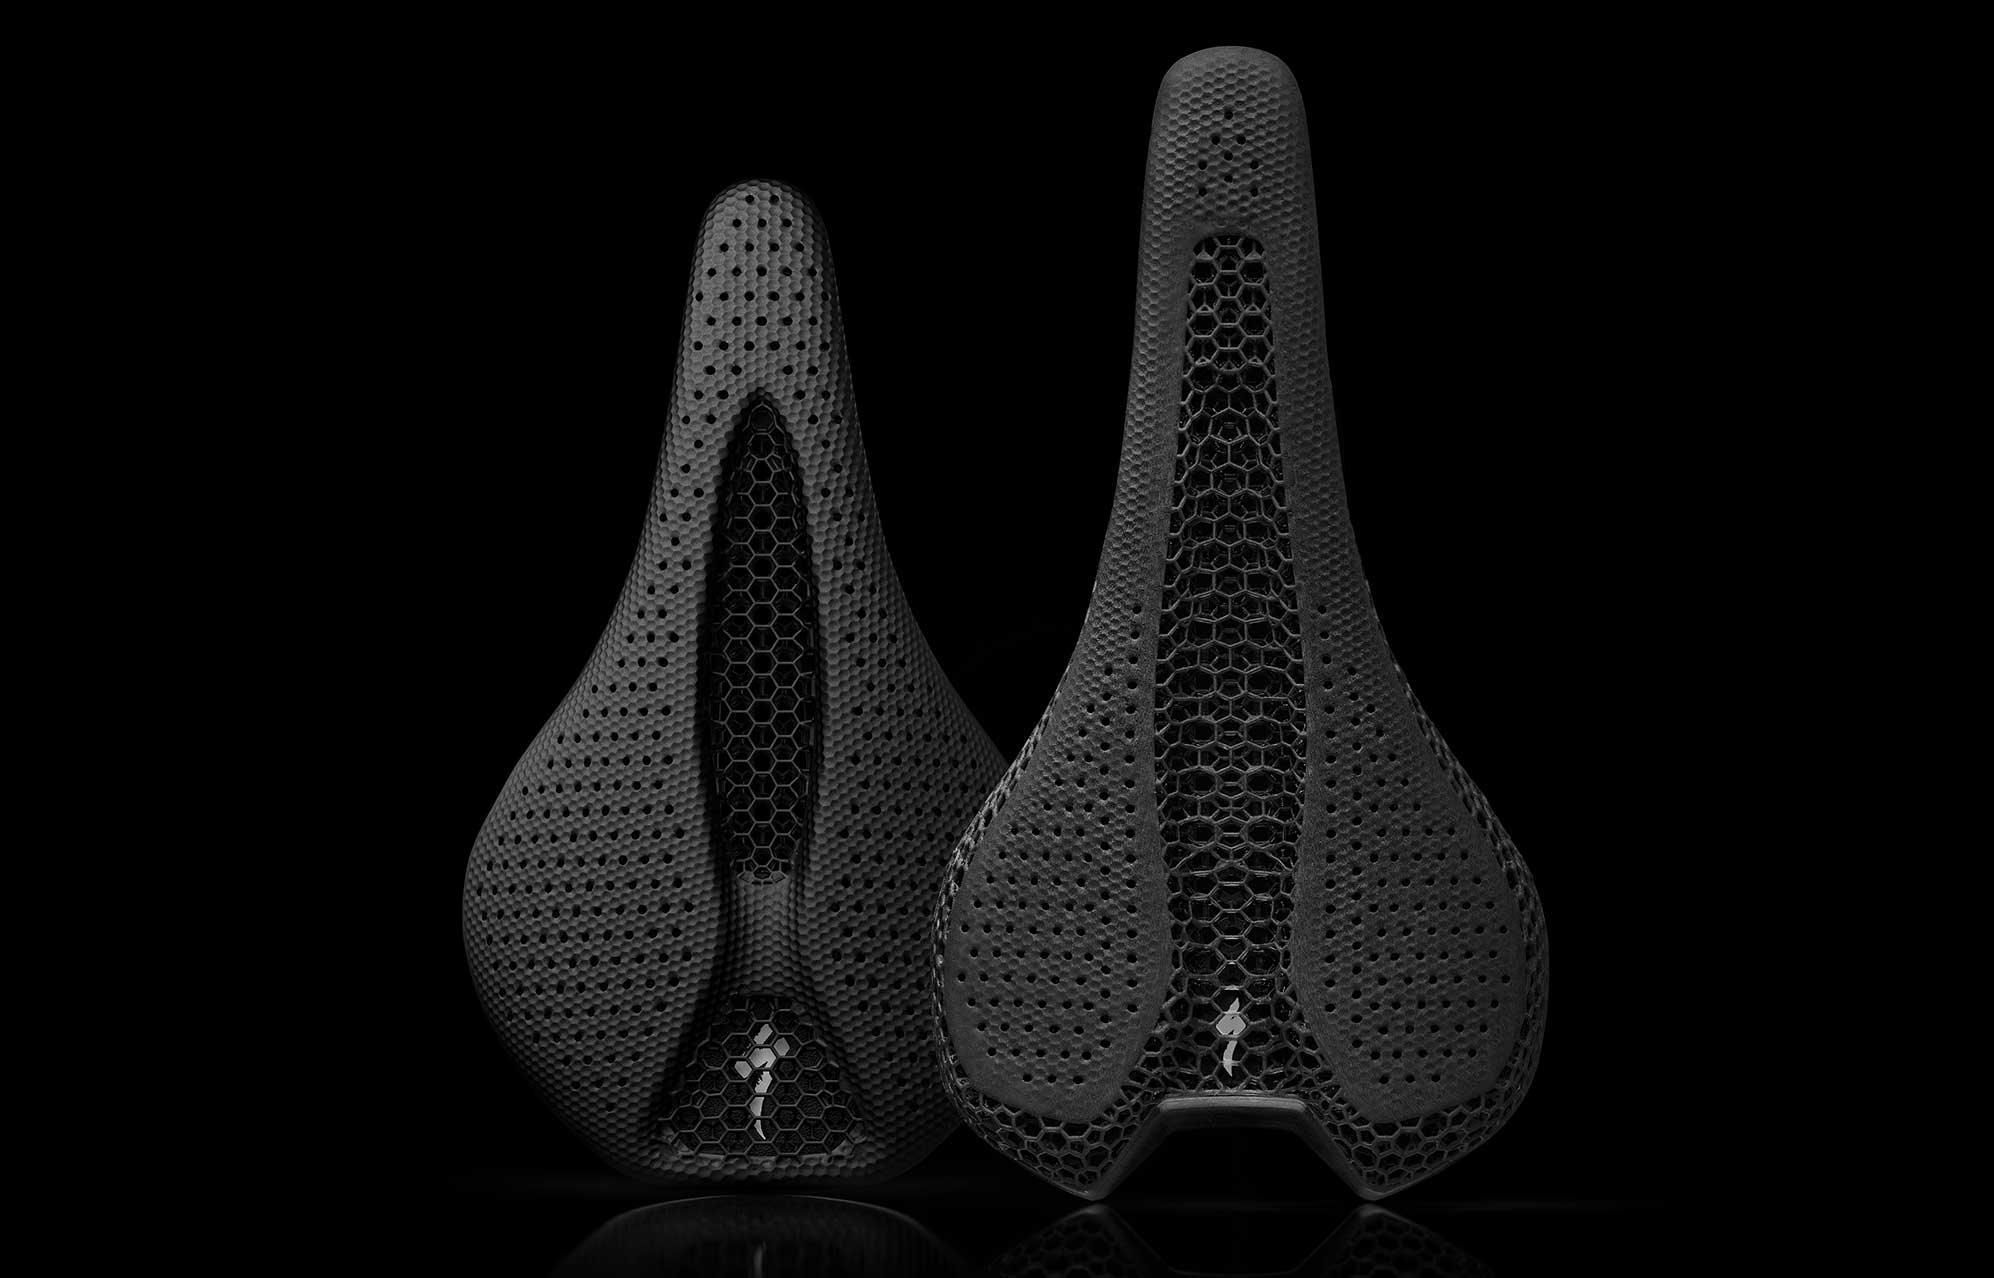 How Specialized Reimagined the Bike Saddle: Bringing Innovative Design, Engineering, and Additive Manufacturing Together